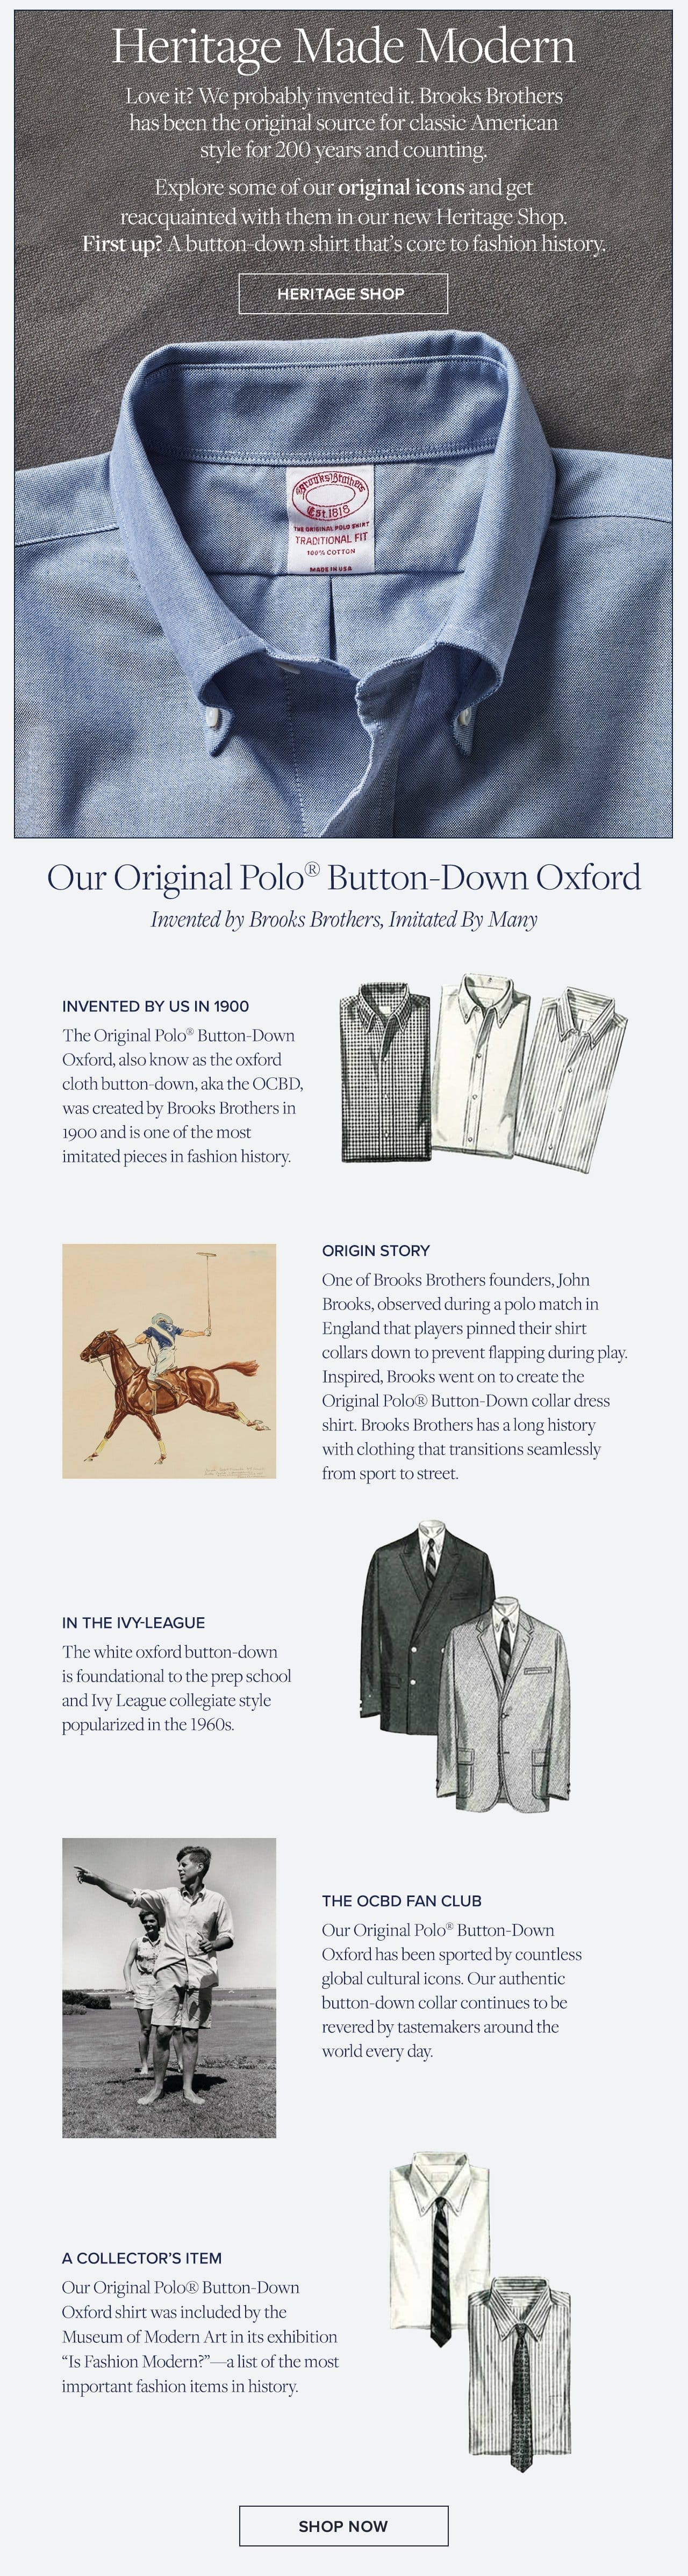 Our Original Polo Button-Down Oxford Invented by Brooks Brothers, Imitated By Many